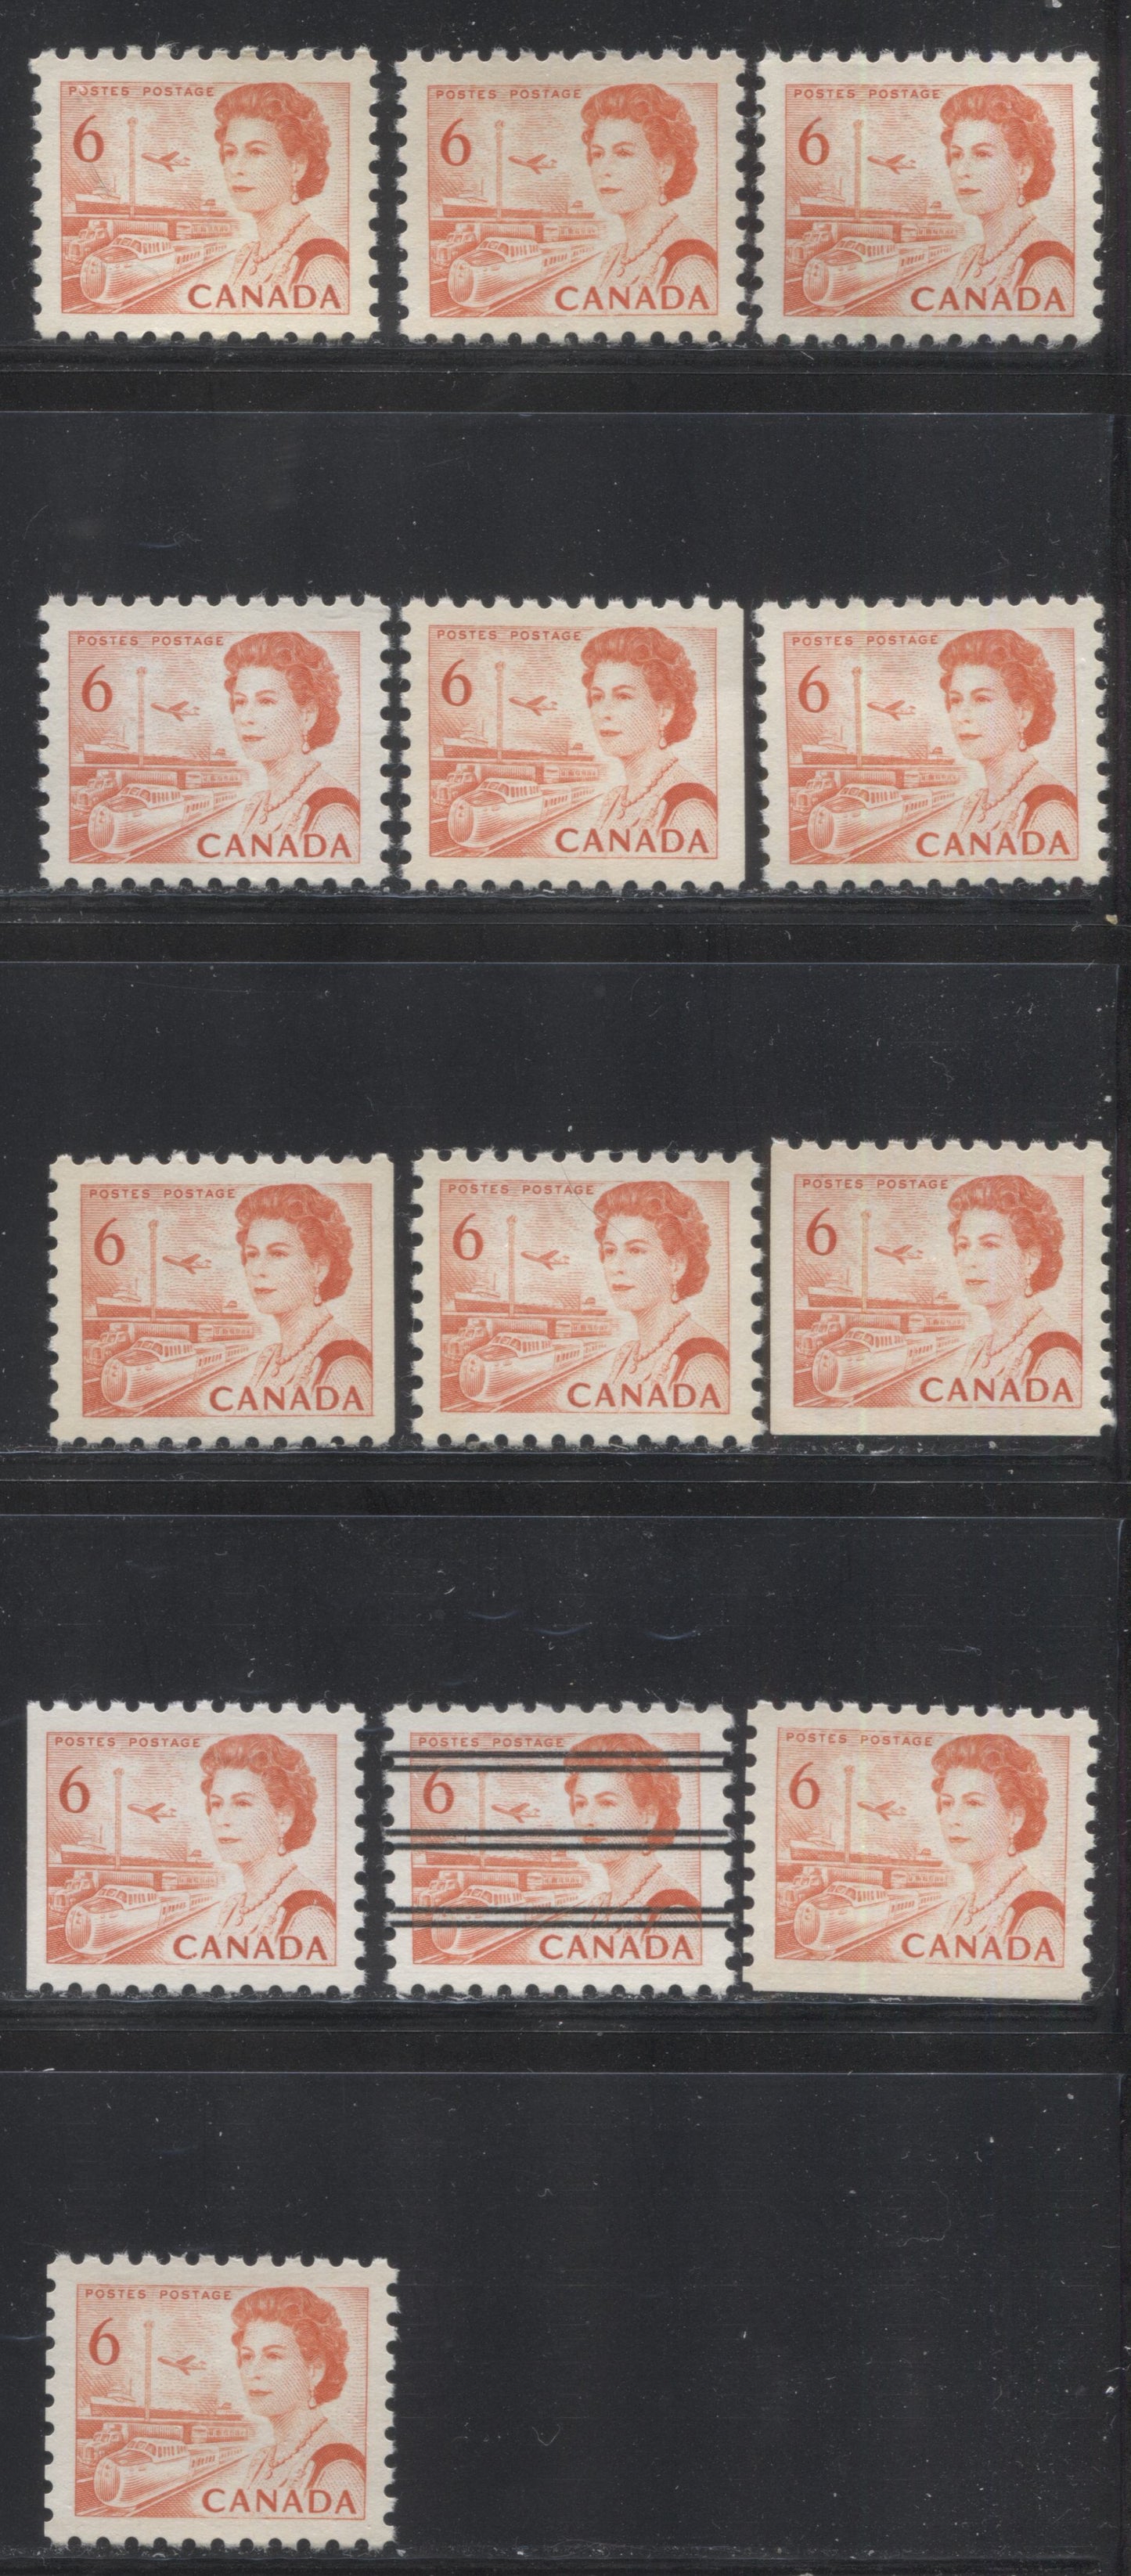 Lot 153 Canada #459-459as 6c Red Orange Transportation, 1967-1973 Centennial Definitive Issue, A VFNH Group of Perf 10 Sheet and Booklet Stamps, Tagged and Untagged, Various Papers